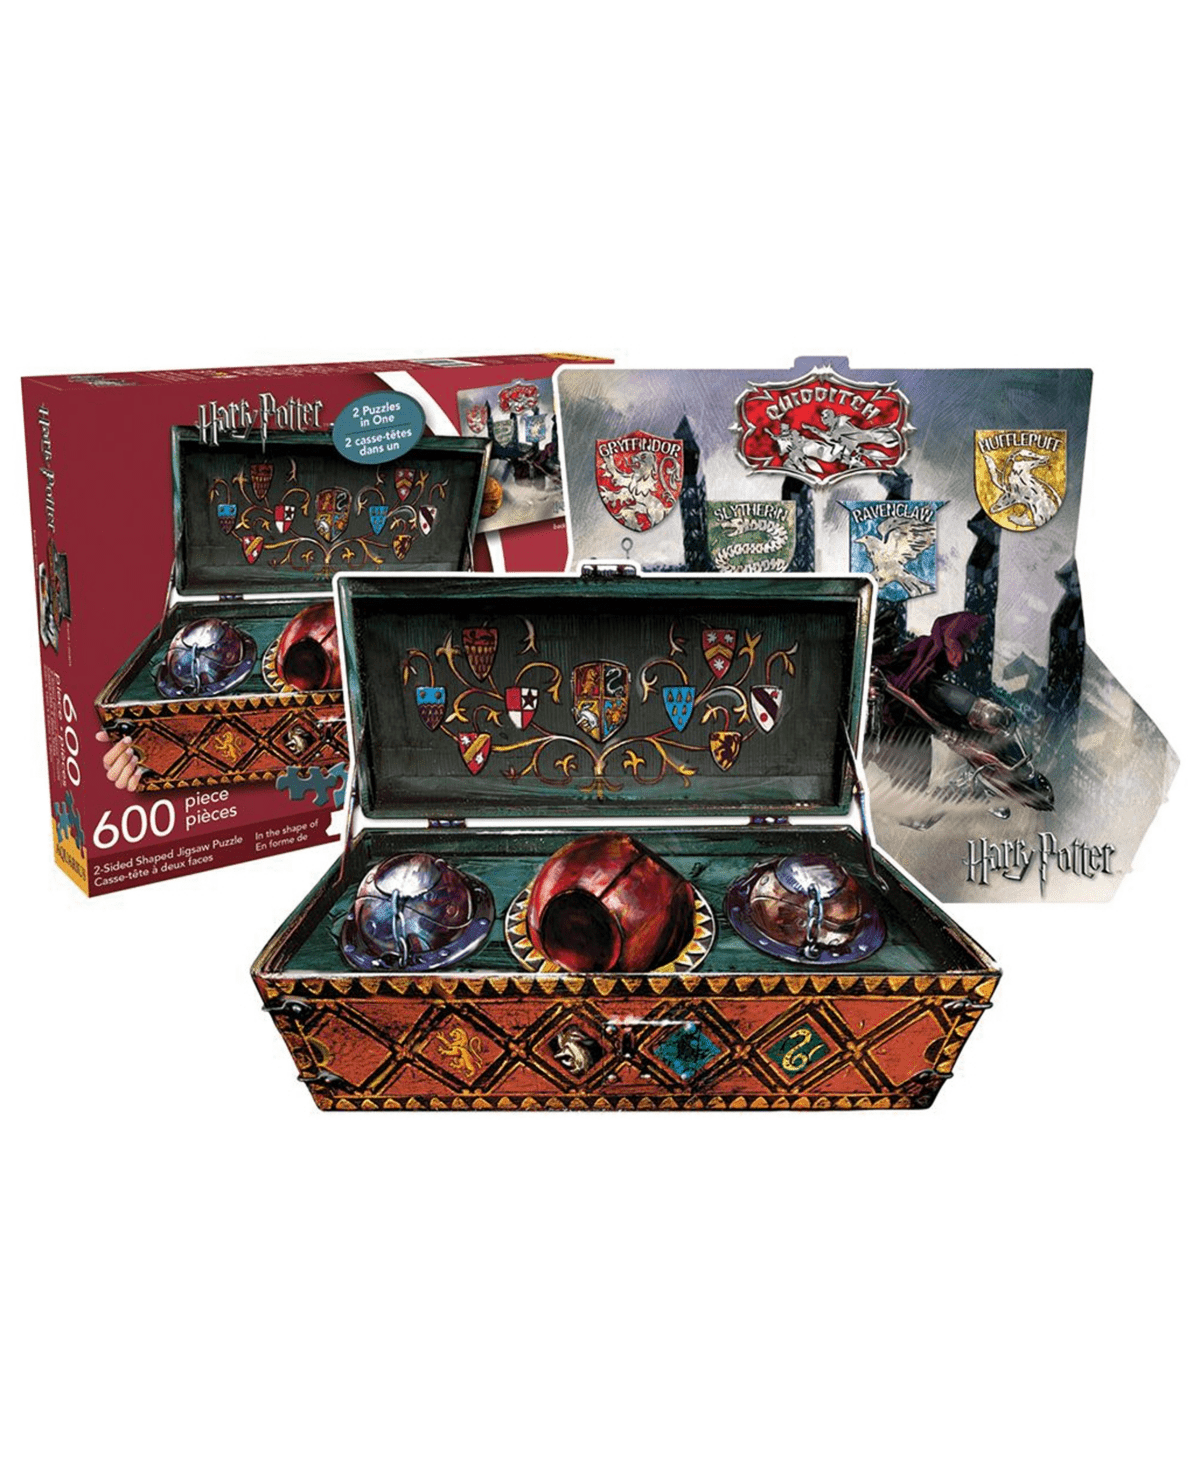 Harry Potter Quidditch Set (Double Sided Shaped Puzzle, 600pc)